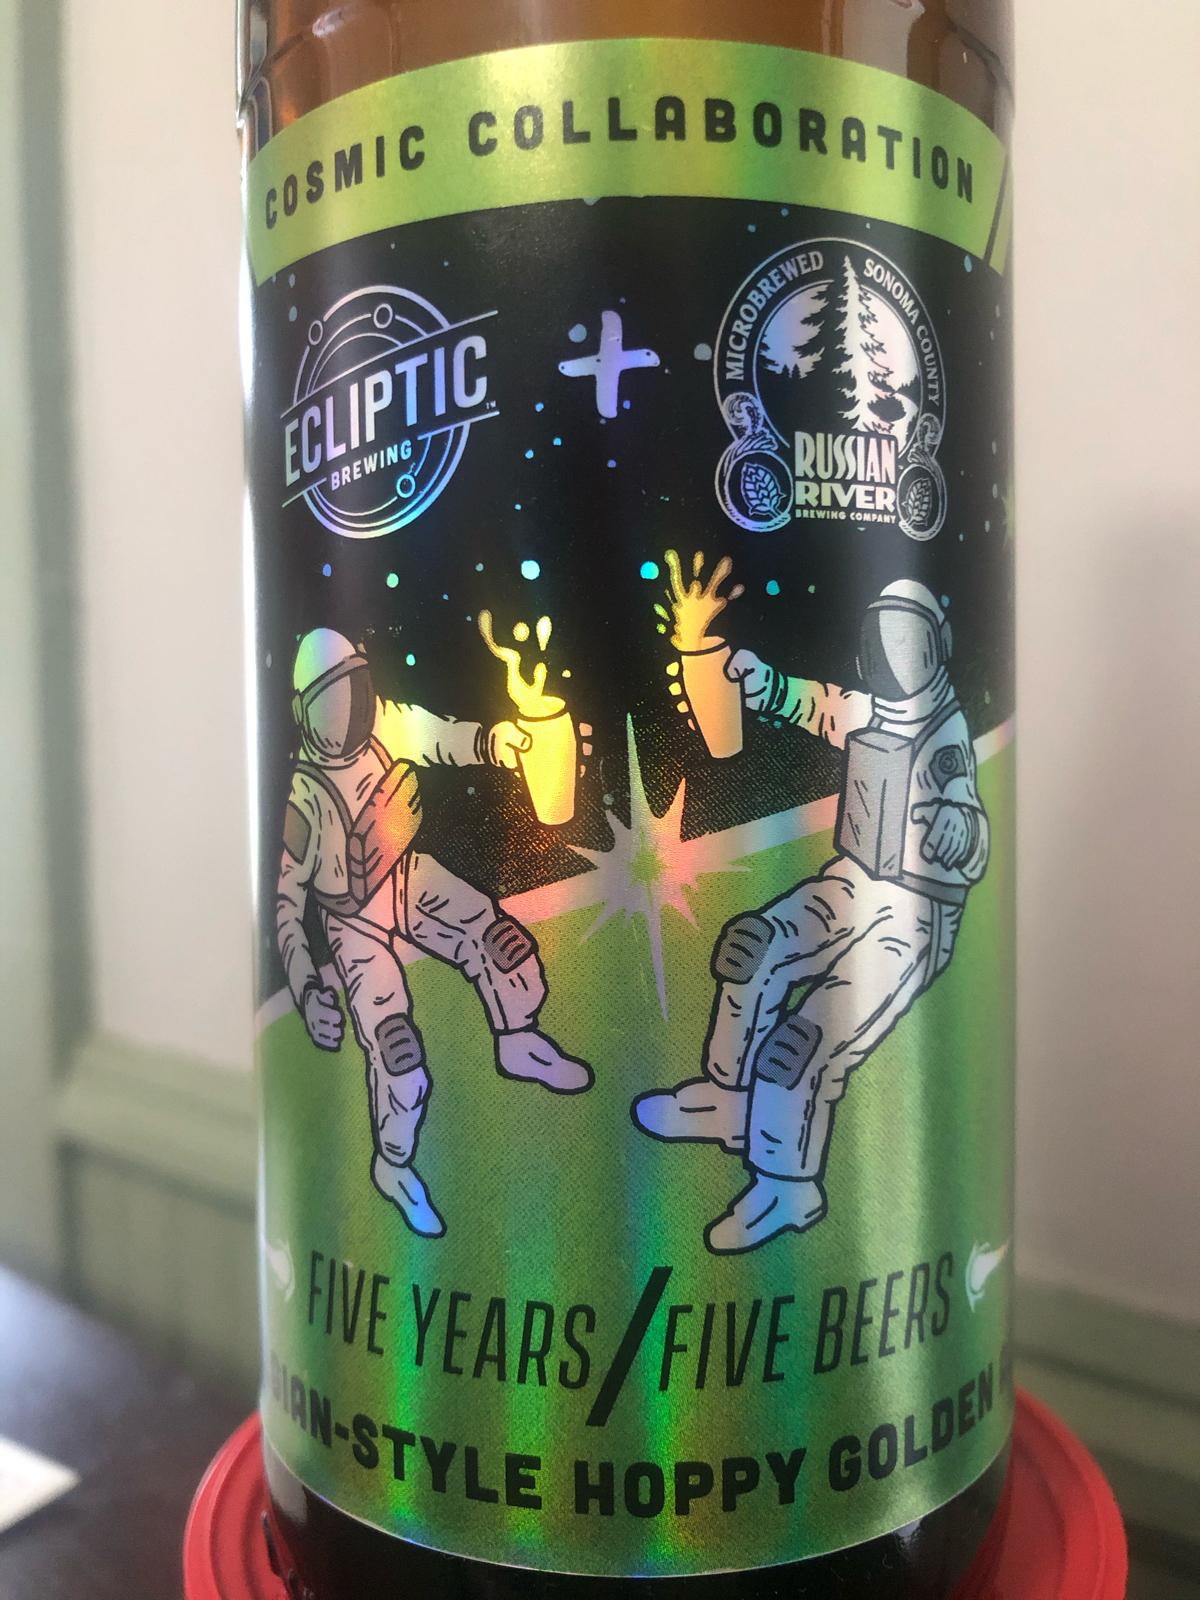 Five Years / Five Beers (Collaboration with Russian River)